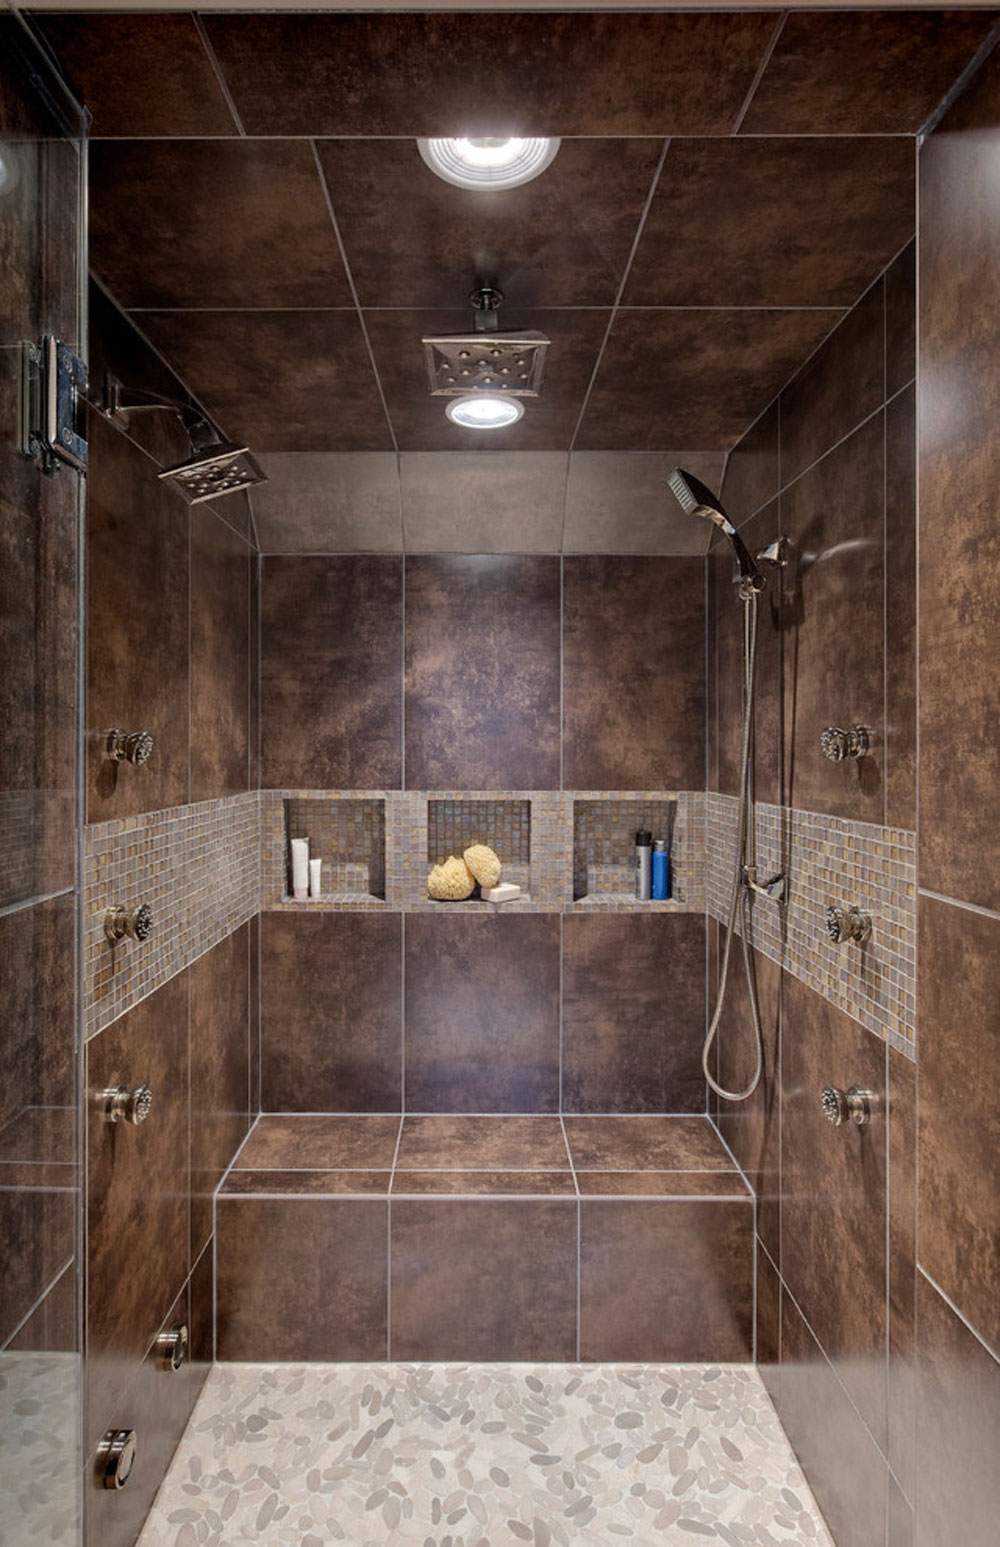 Transitional-Master-Bath-by-Drury-Design Shower niche ideas and best practices for your bathroom